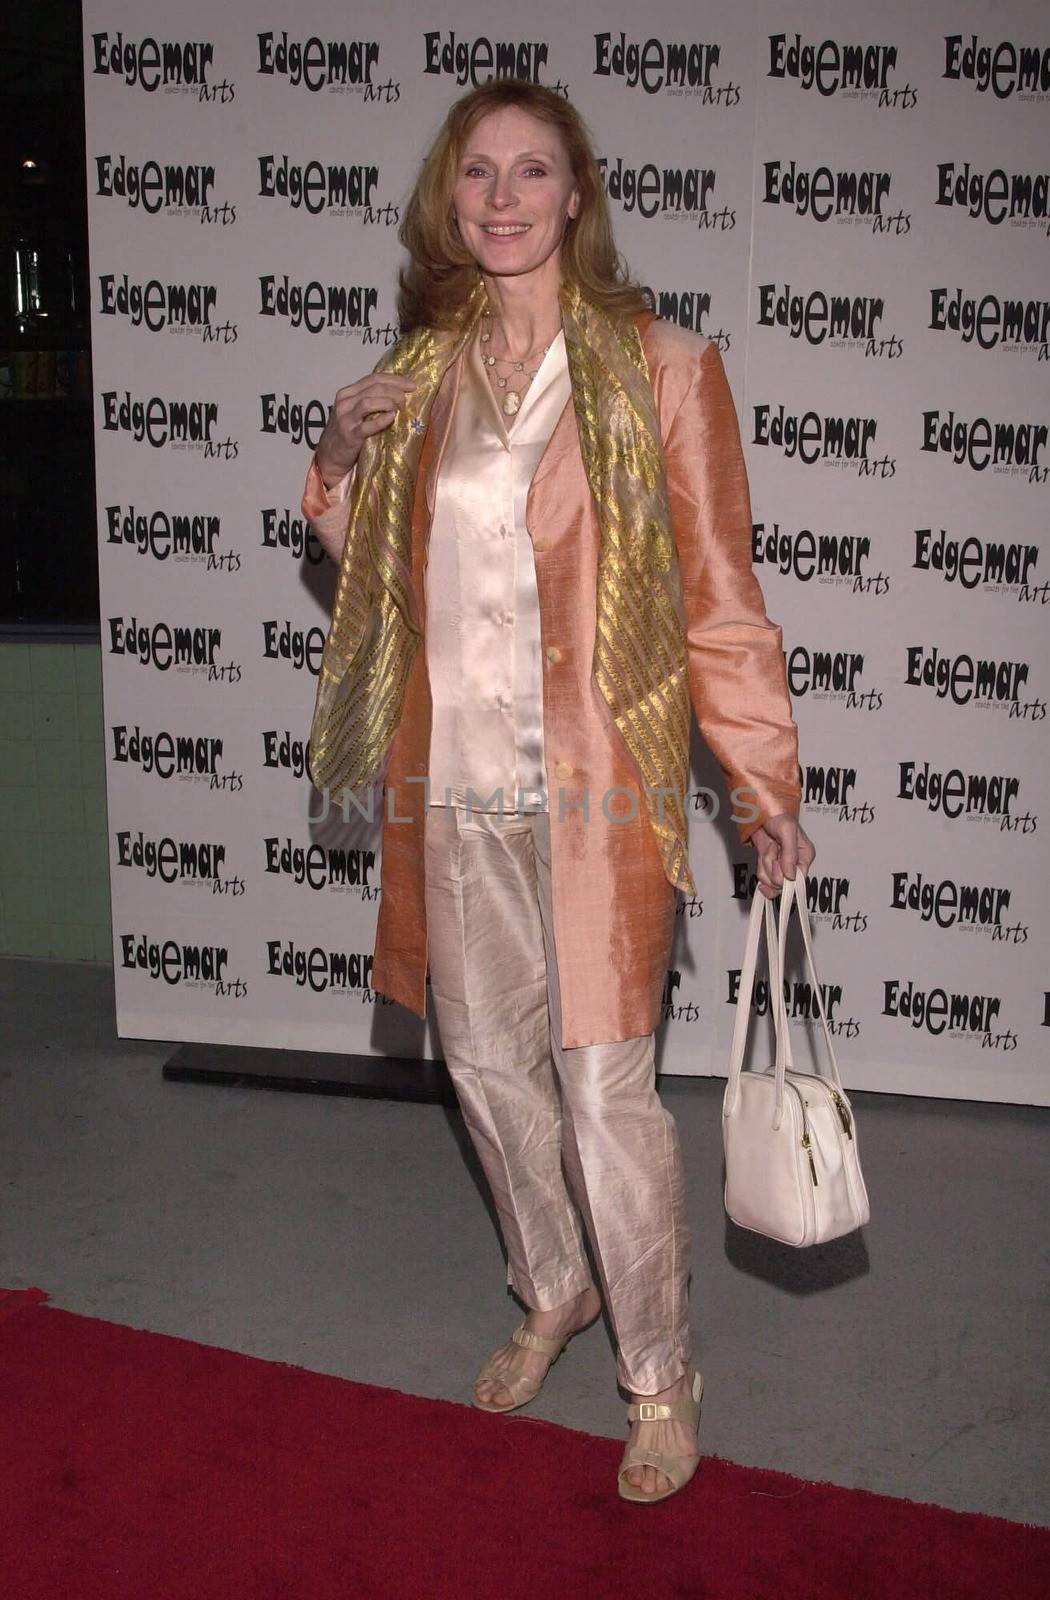 Gates McFadden at the "Starry Starry Night" fundraiser to benefit the Edgemar Center for the Arts. Santa Monica, 04-15-00